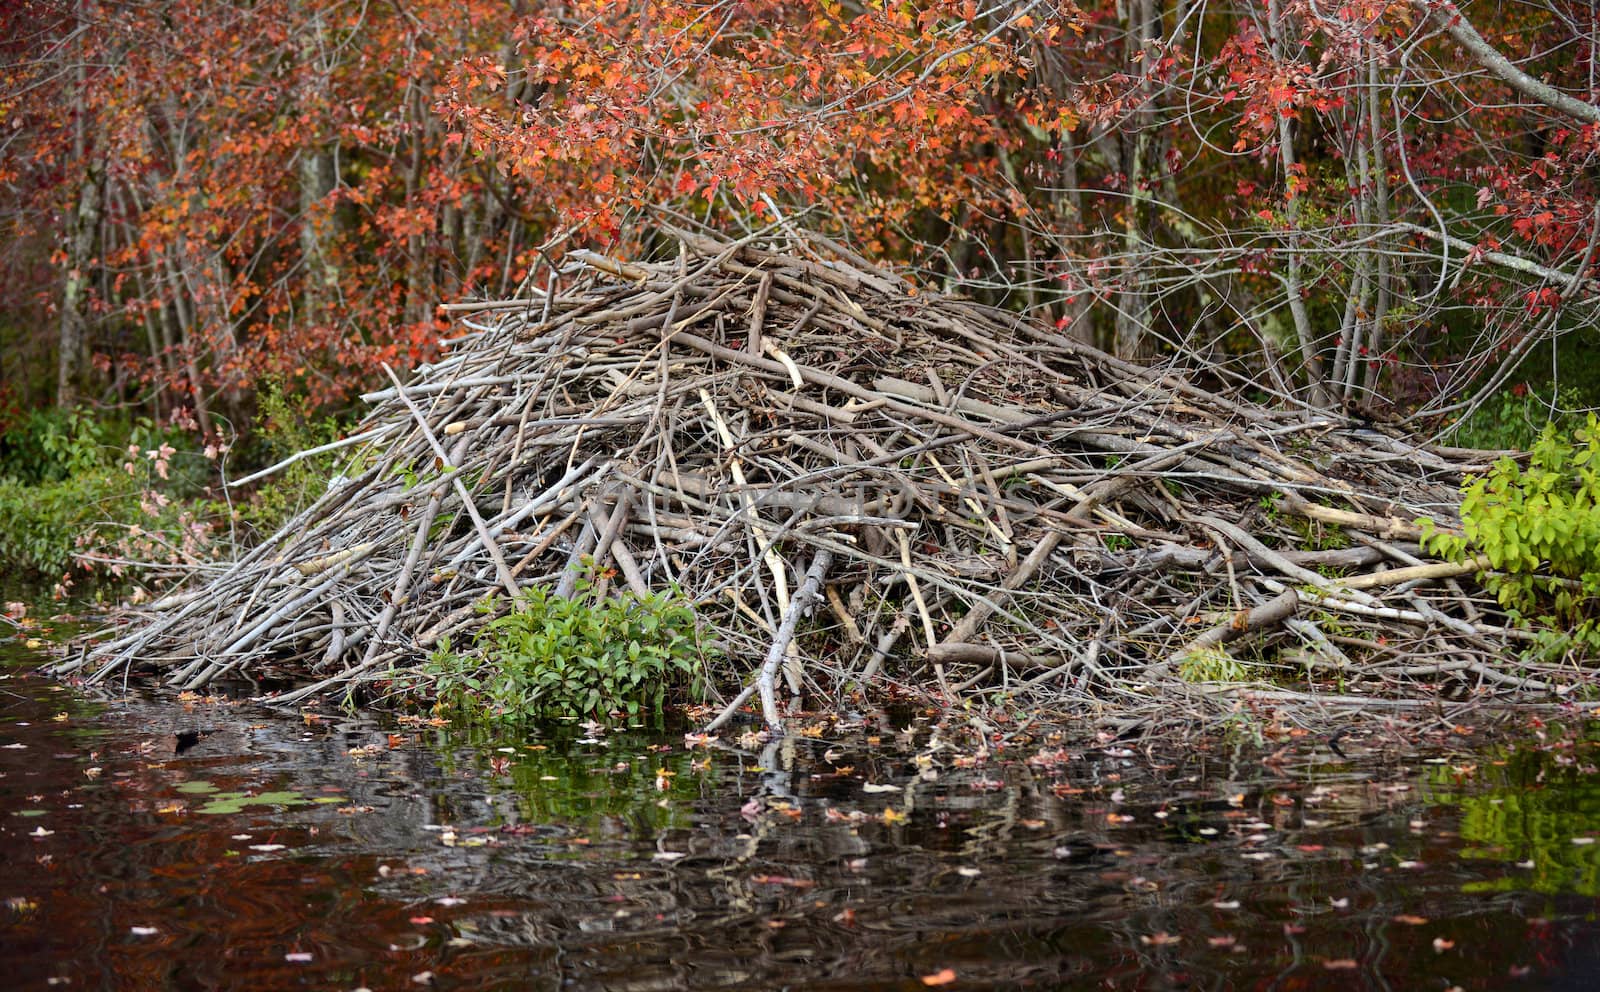 beaver dam in an autumn forest by ftlaudgirl